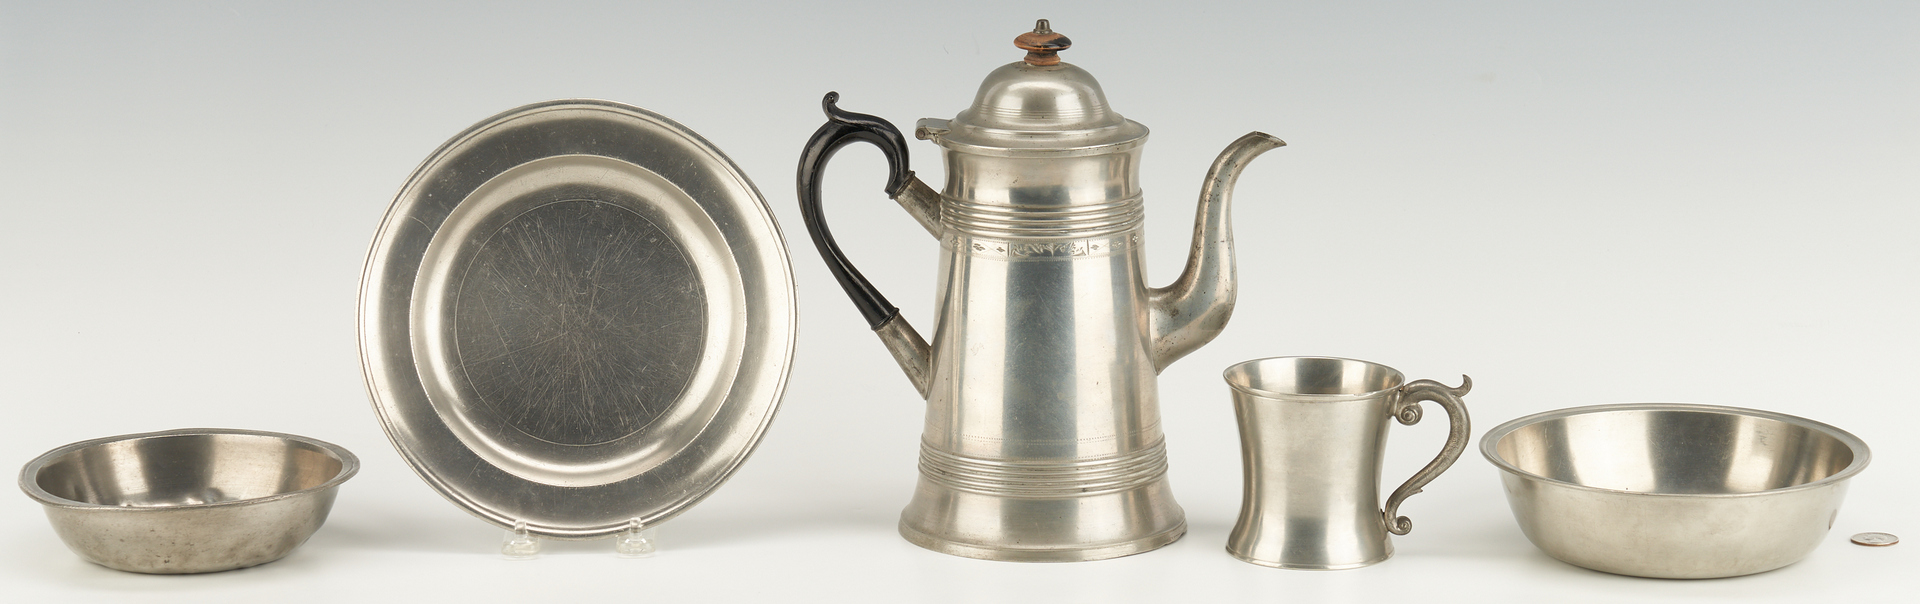 Lot 270: 5 American Pewter Items, incl. Israel Trask Coffeepot